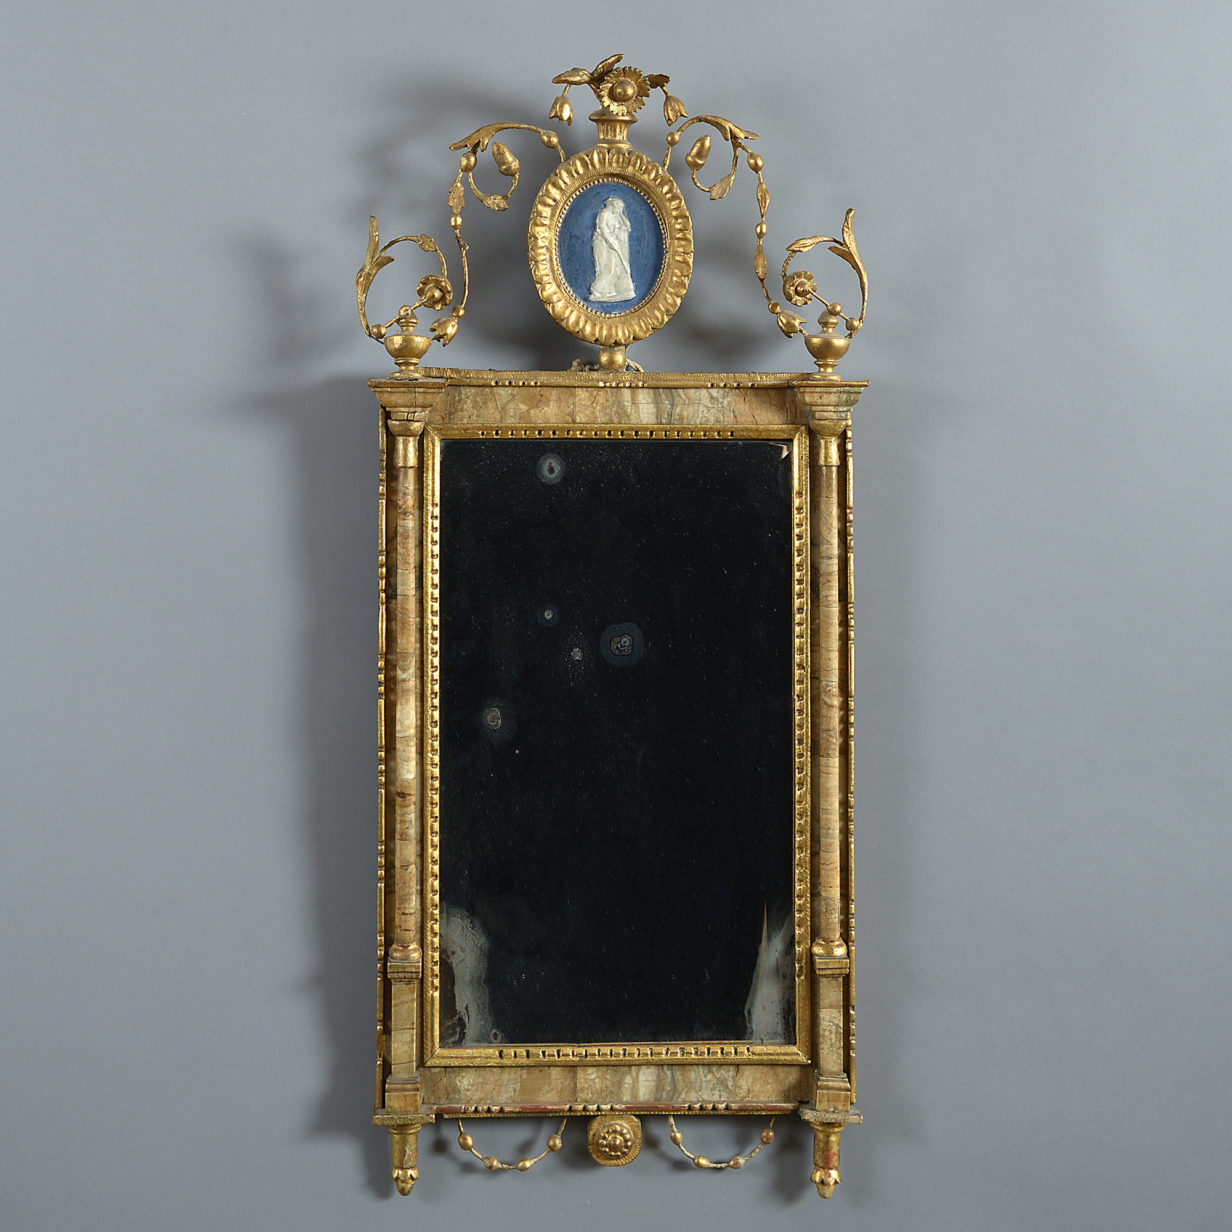 A late 18th century neo-classical mirror